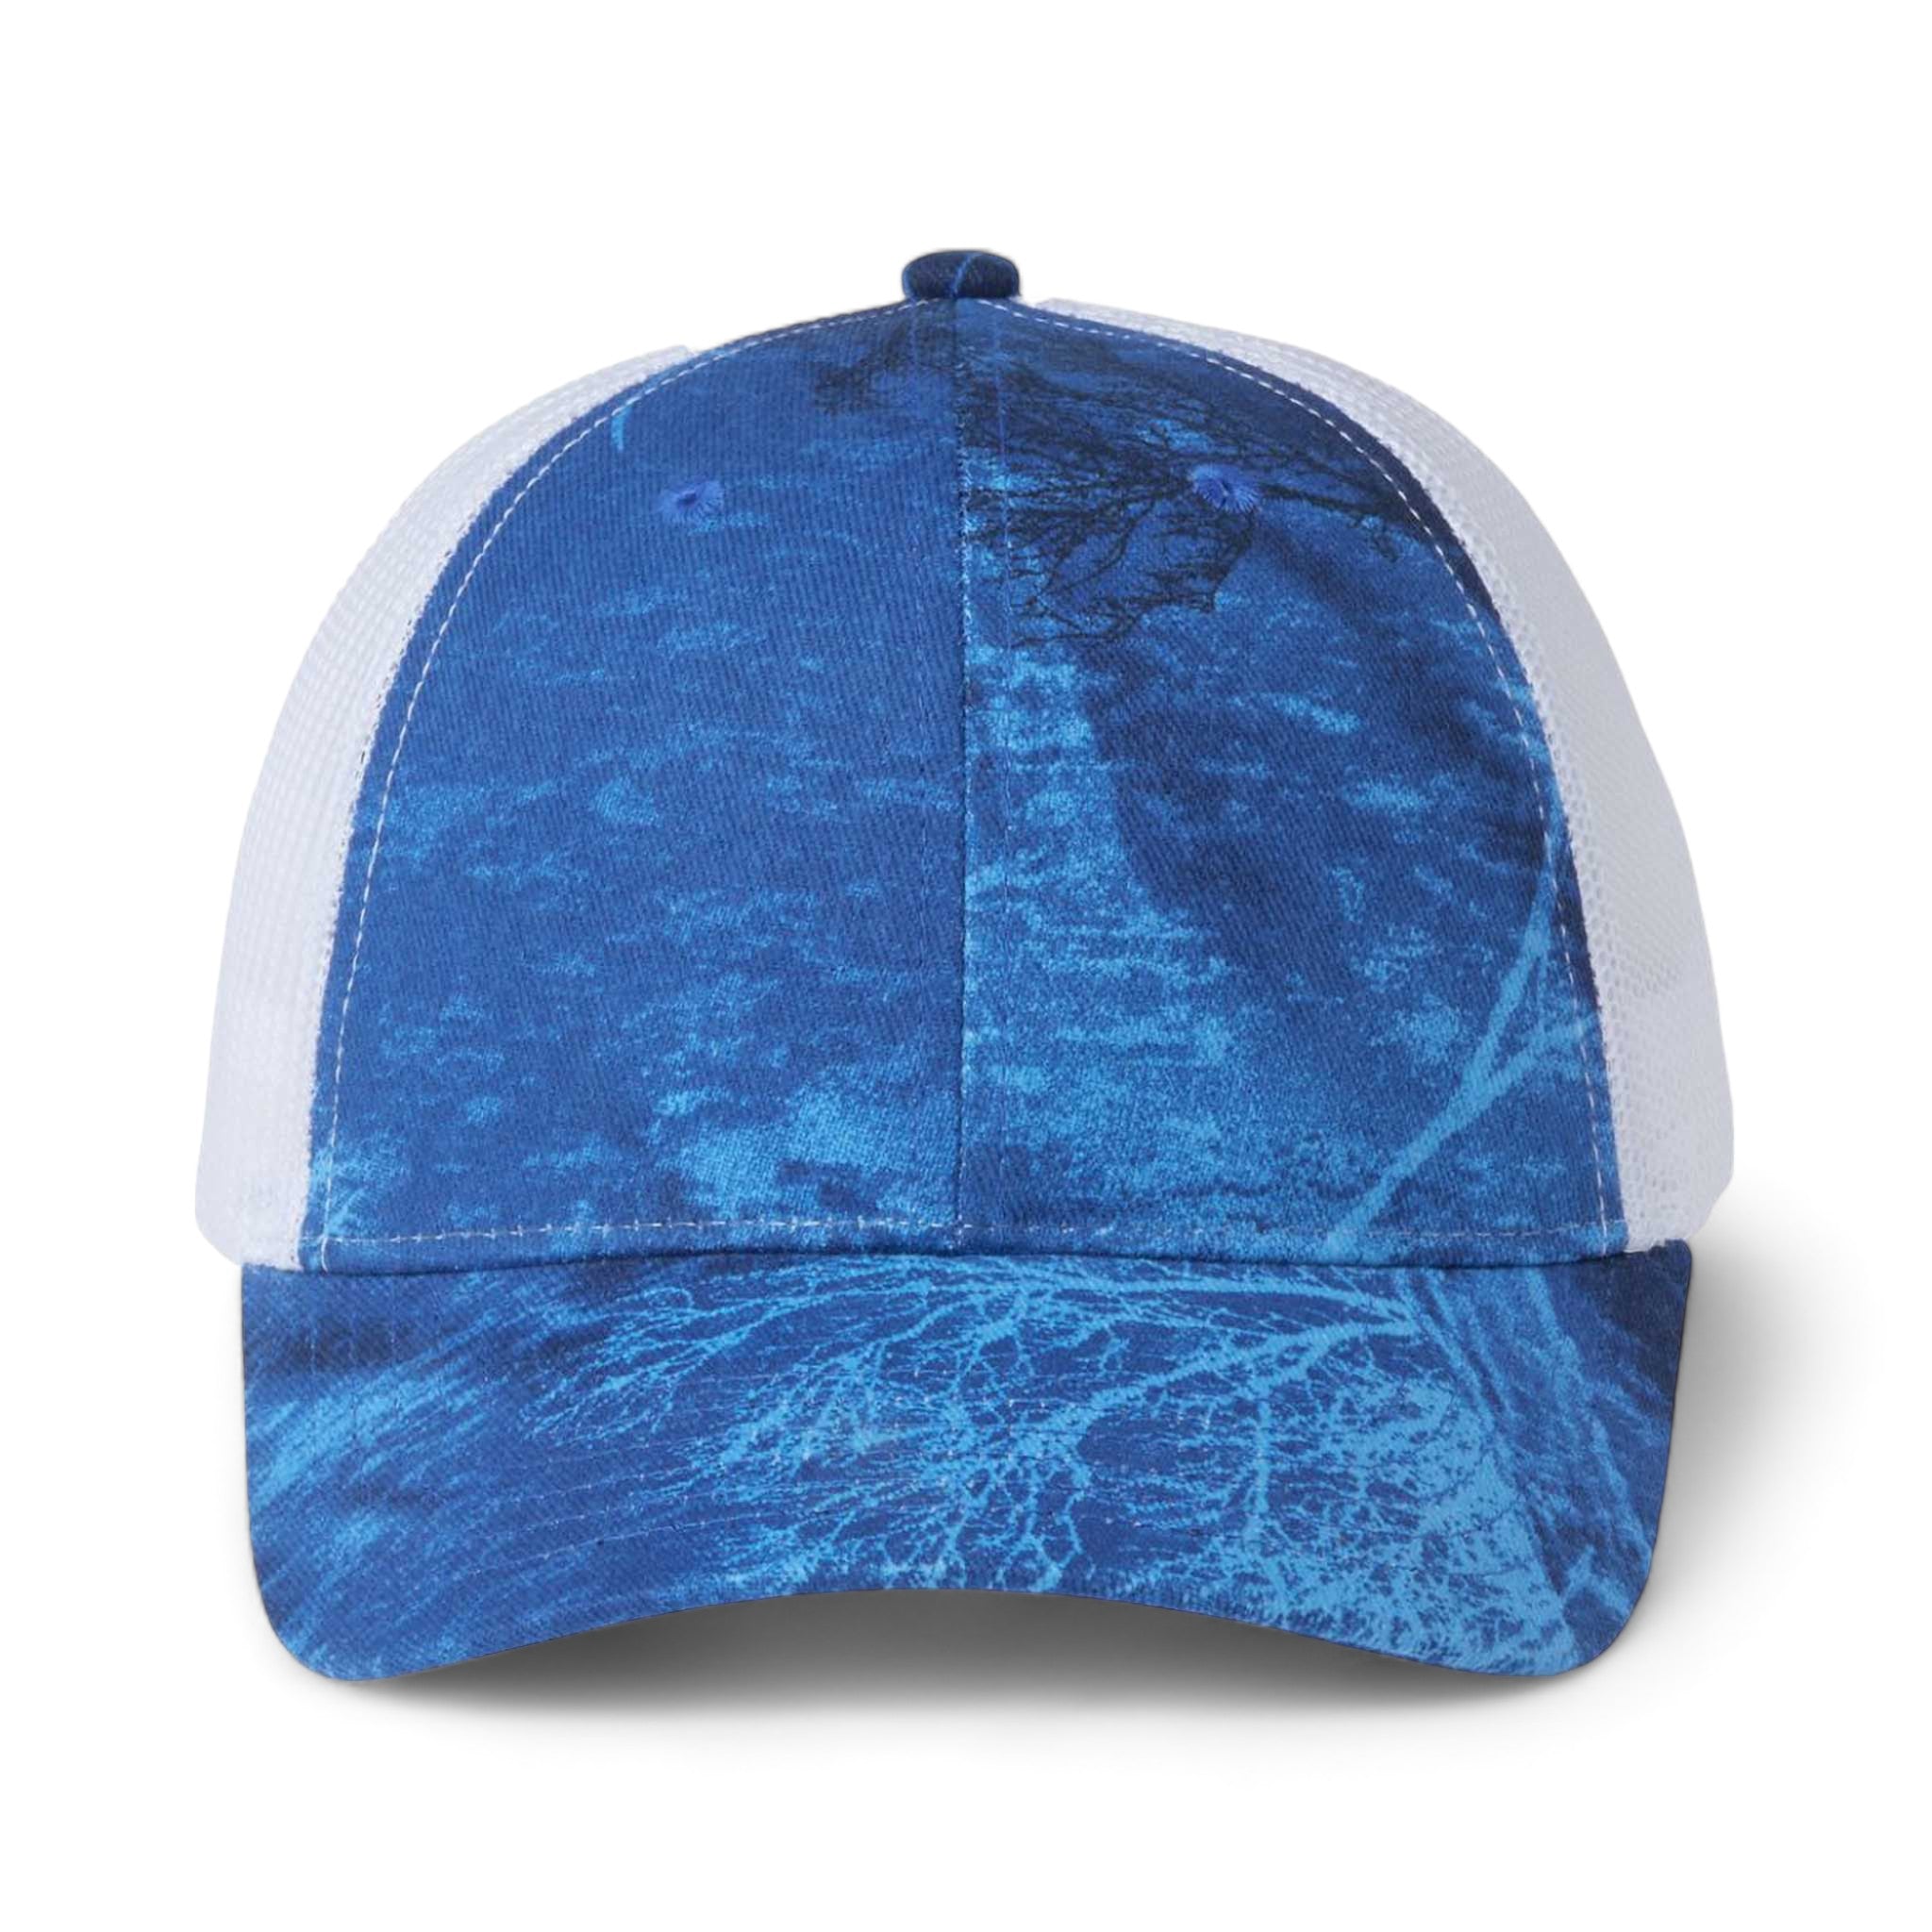 Front view of Kati LC5M custom hat in realtree fishing blue and white